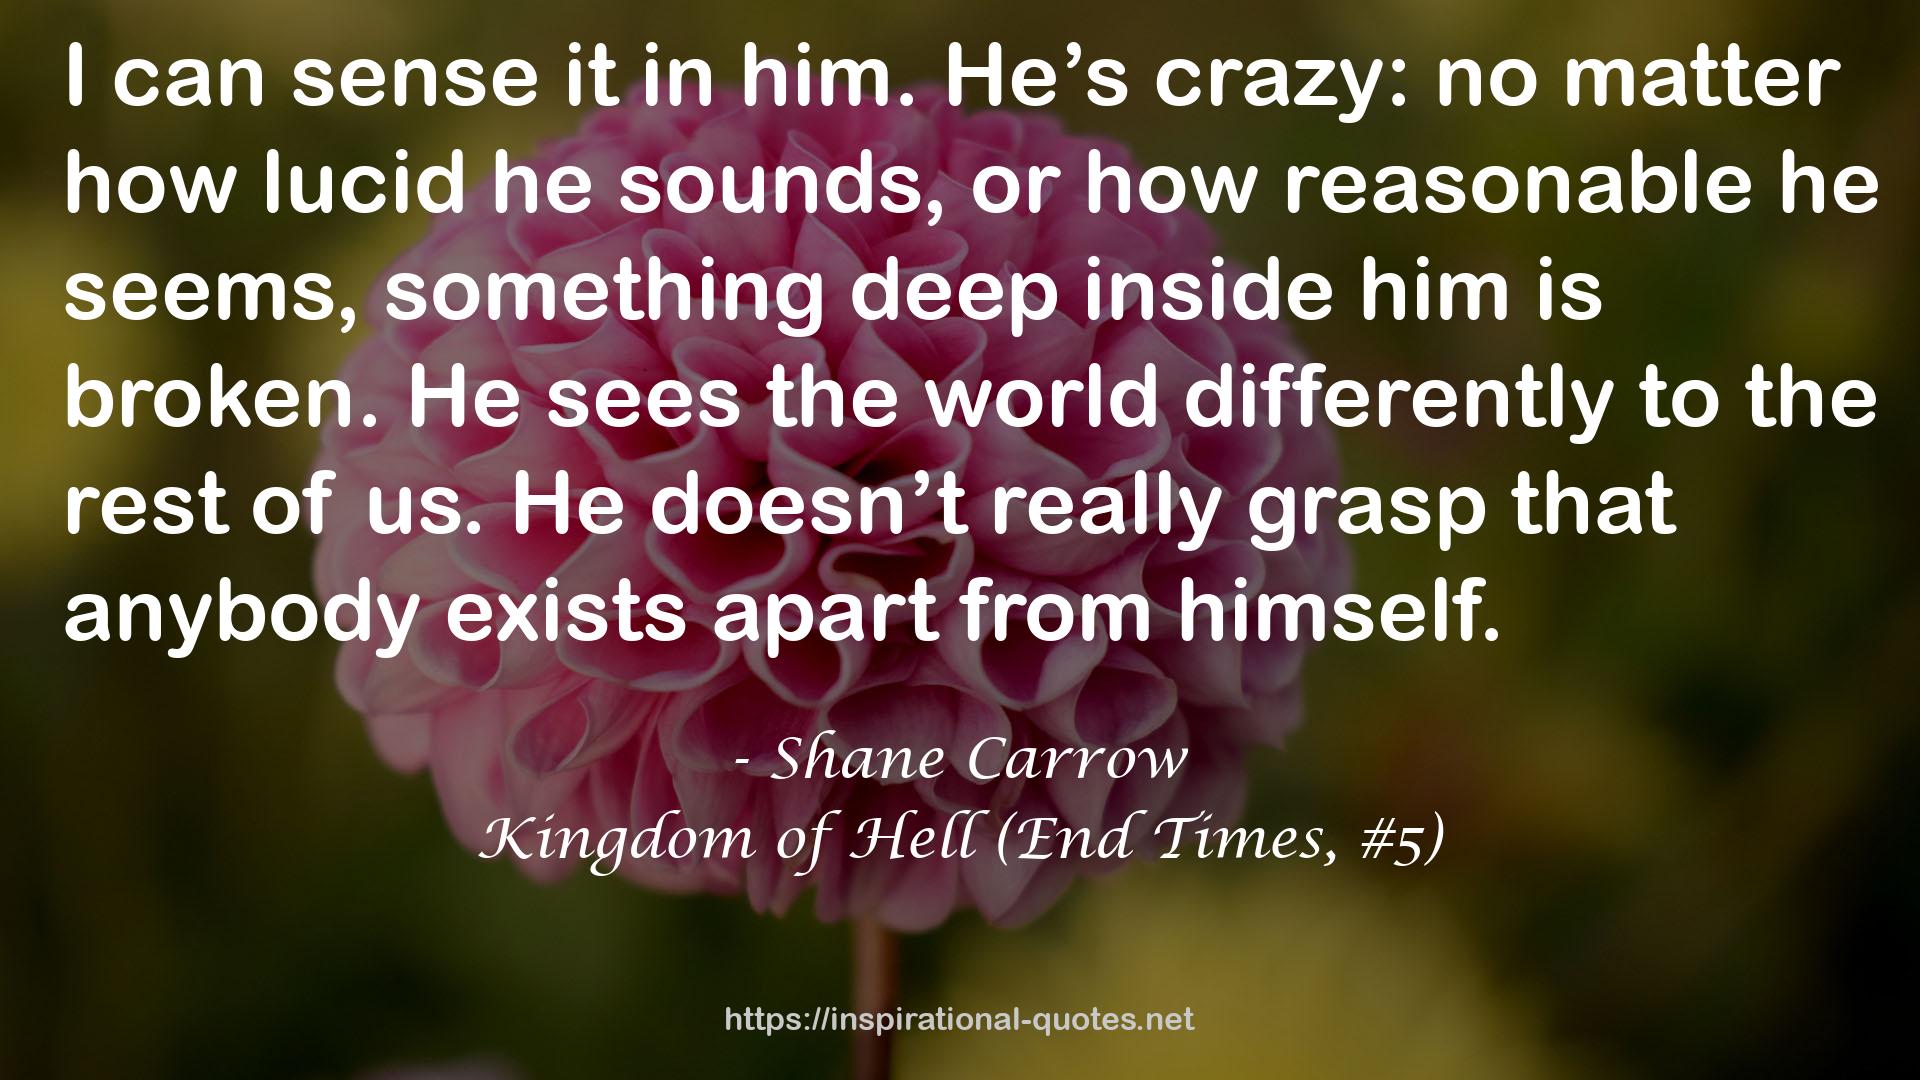 Kingdom of Hell (End Times, #5) QUOTES